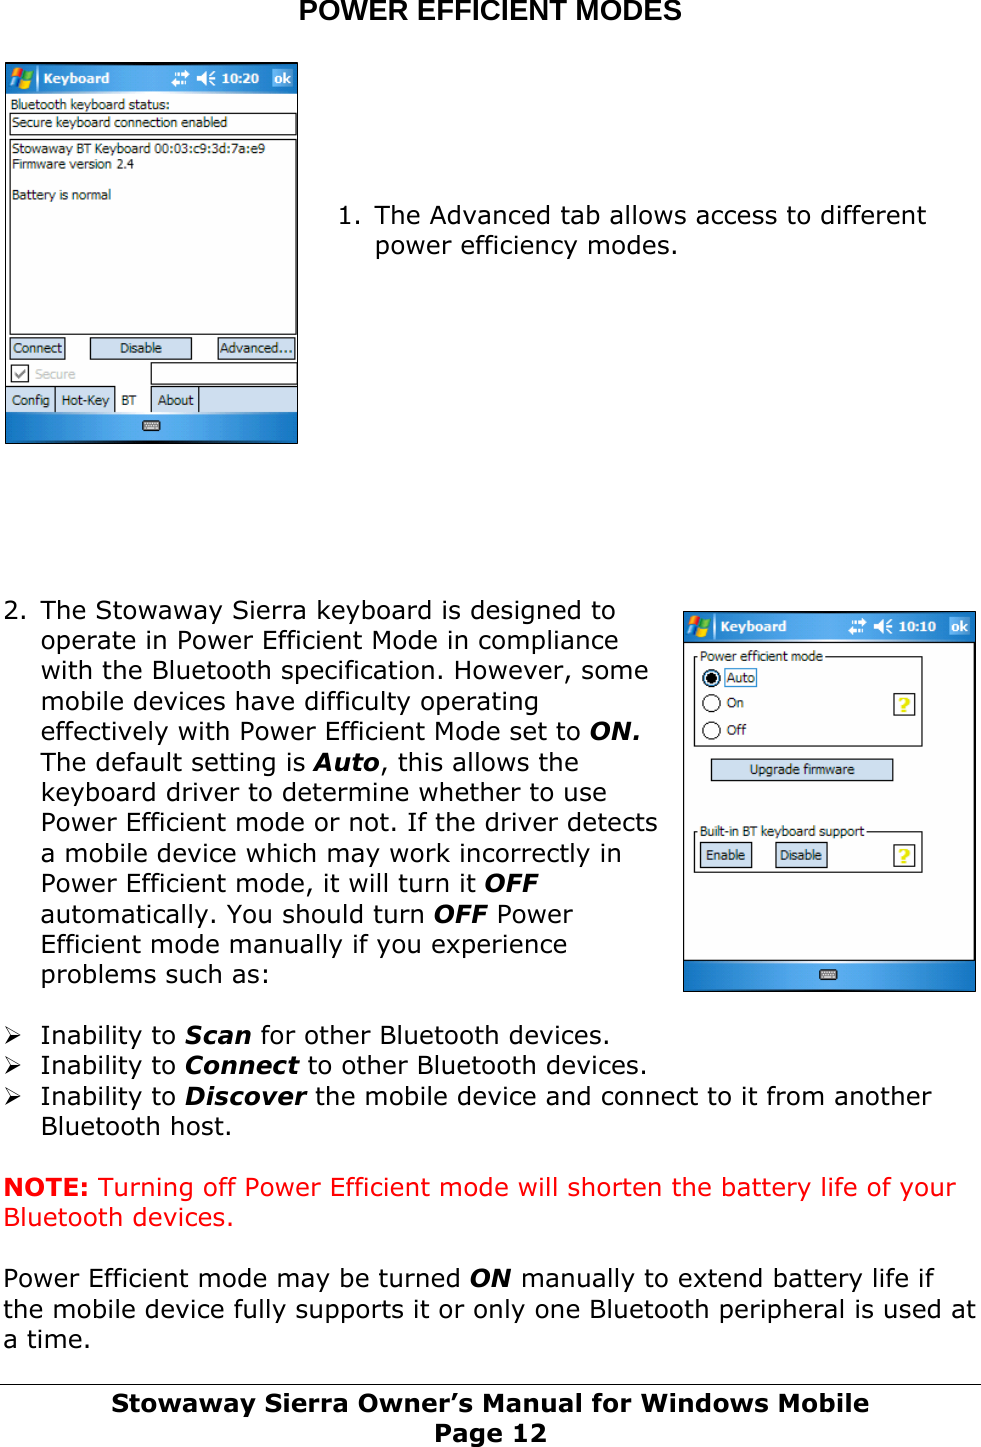 POWER EFFICIENT MODES       1. The Advanced tab allows access to different power efficiency modes.            2. The Stowaway Sierra keyboard is designed to operate in Power Efficient Mode in compliance with the Bluetooth specification. However, some mobile devices have difficulty operating effectively with Power Efficient Mode set to ON. The default setting is Auto, this allows the keyboard driver to determine whether to use Power Efficient mode or not. If the driver detects a mobile device which may work incorrectly in Power Efficient mode, it will turn it OFF automatically. You should turn OFF Power Efficient mode manually if you experience problems such as:  ¾ Inability to Scan for other Bluetooth devices. ¾ Inability to Connect to other Bluetooth devices. ¾ Inability to Discover the mobile device and connect to it from another Bluetooth host.  NOTE: Turning off Power Efficient mode will shorten the battery life of your Bluetooth devices.  Power Efficient mode may be turned ON manually to extend battery life if the mobile device fully supports it or only one Bluetooth peripheral is used at a time. Stowaway Sierra Owner’s Manual for Windows Mobile Page 12 